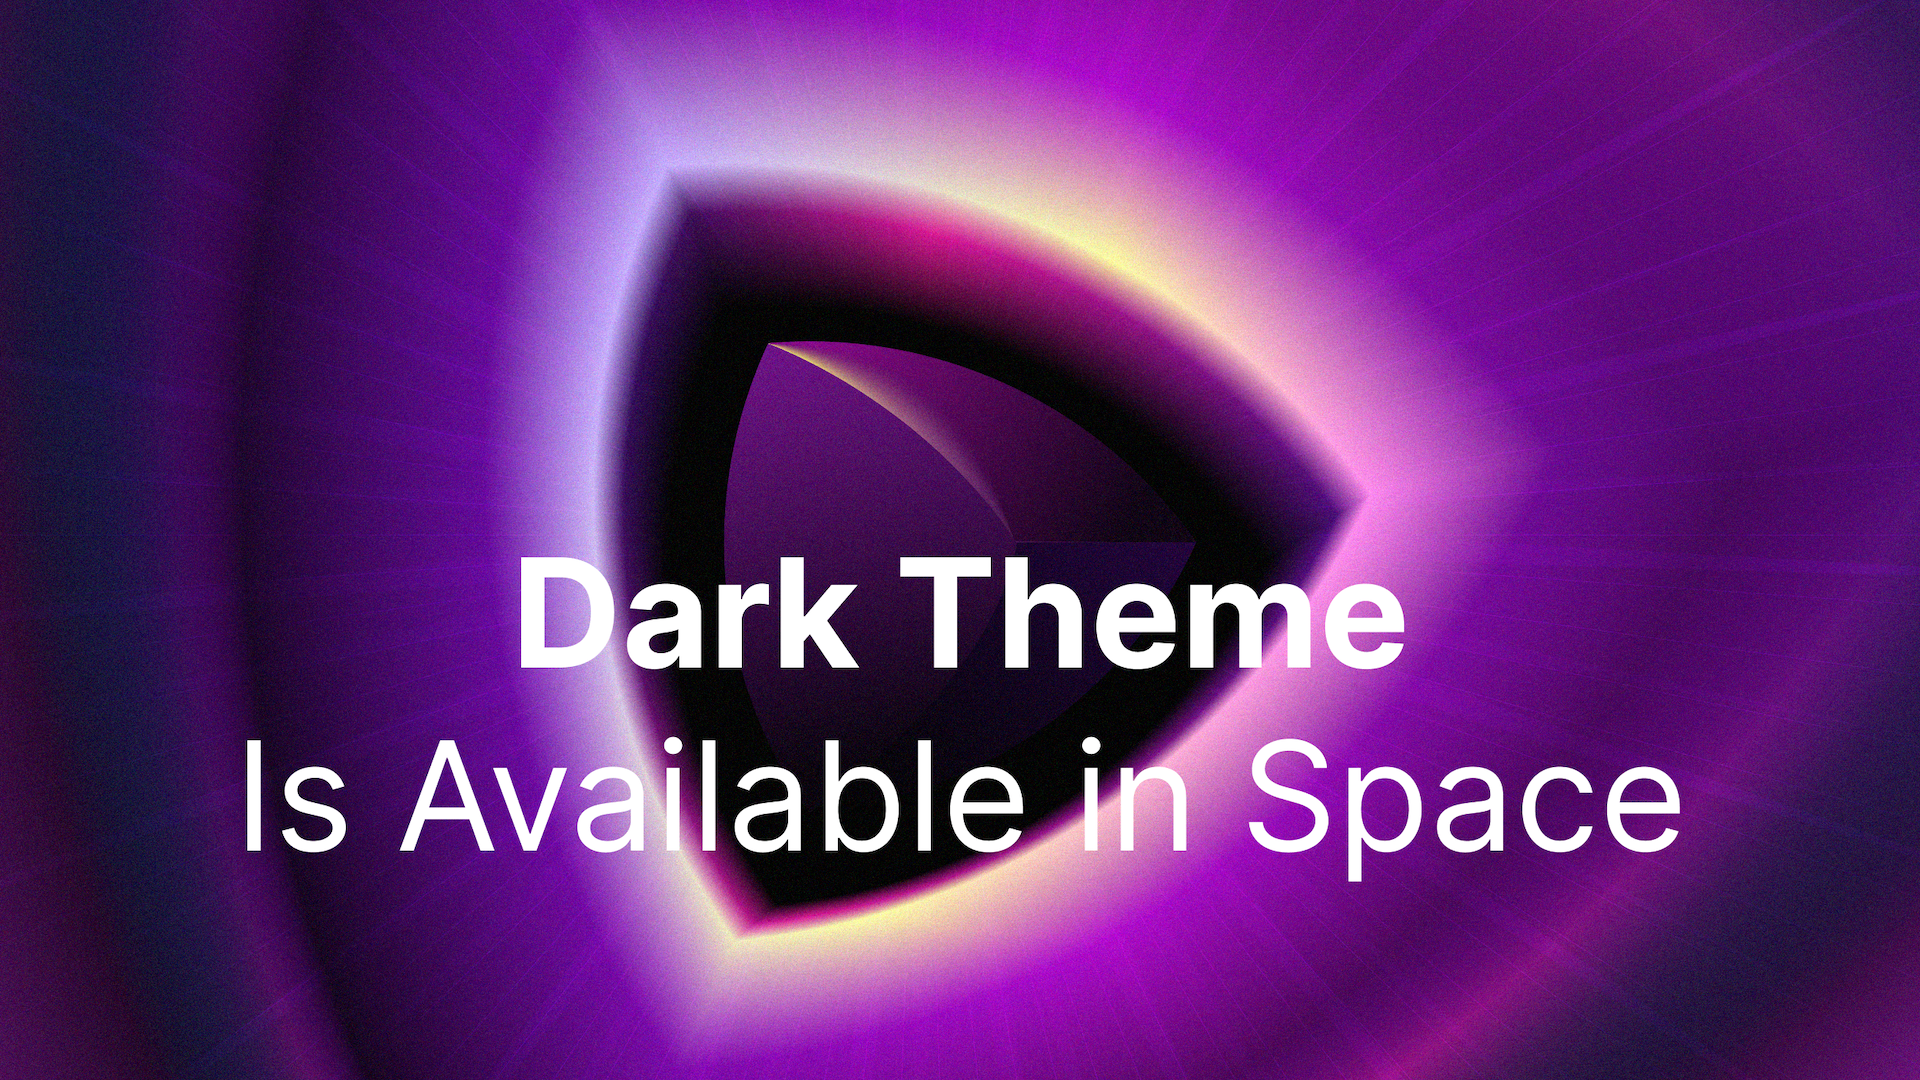 The Dark Theme is now available in Space